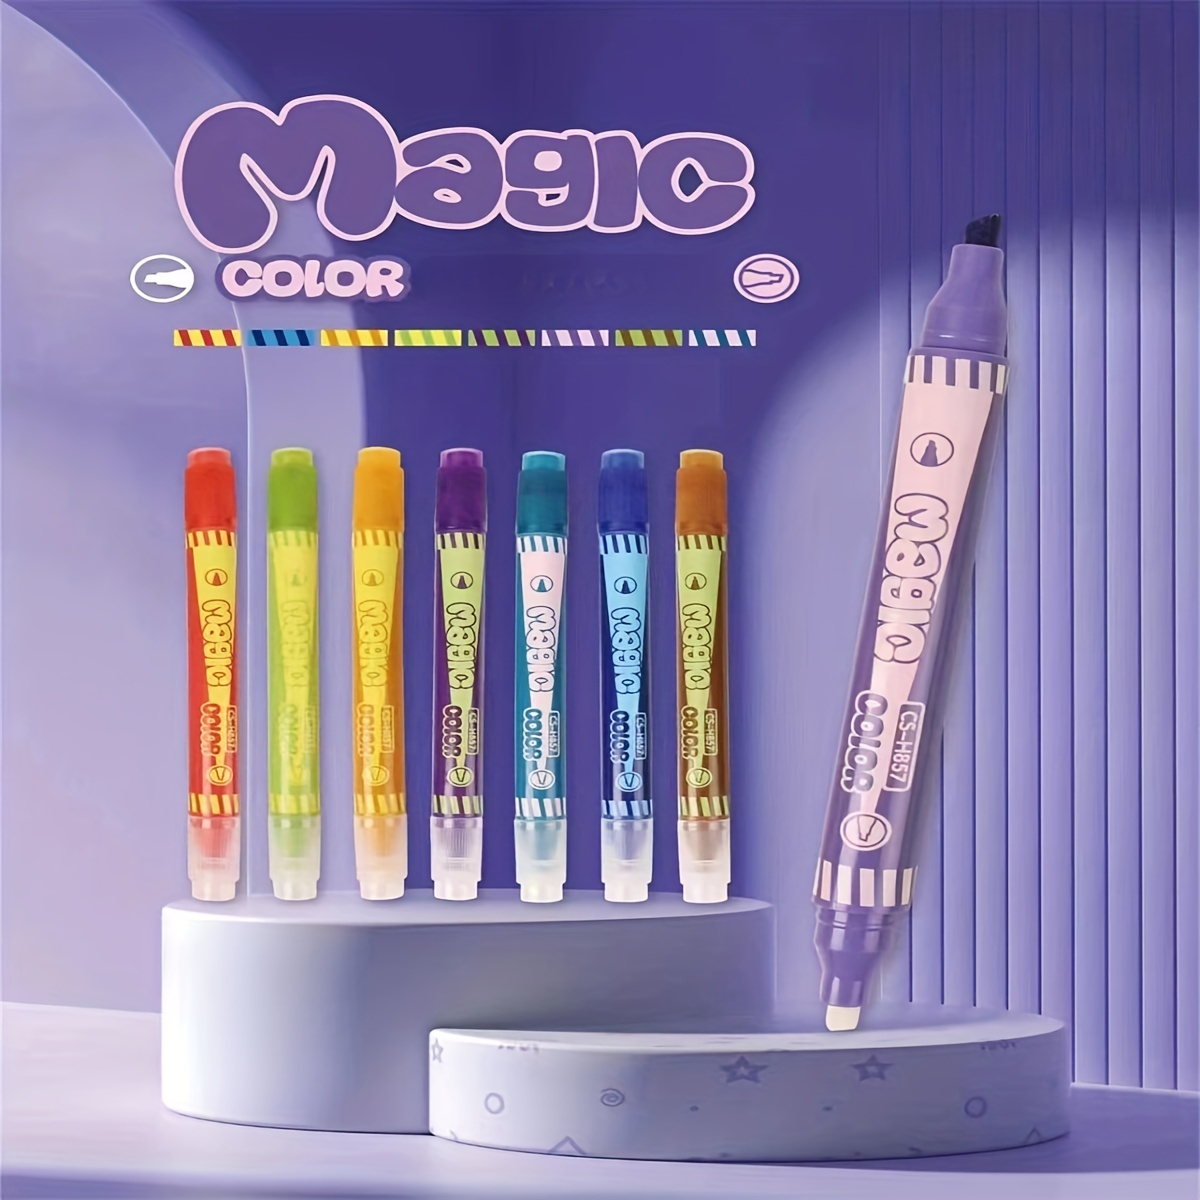 mamayo color-changing color pen (8 color-changing pens + 2 magic